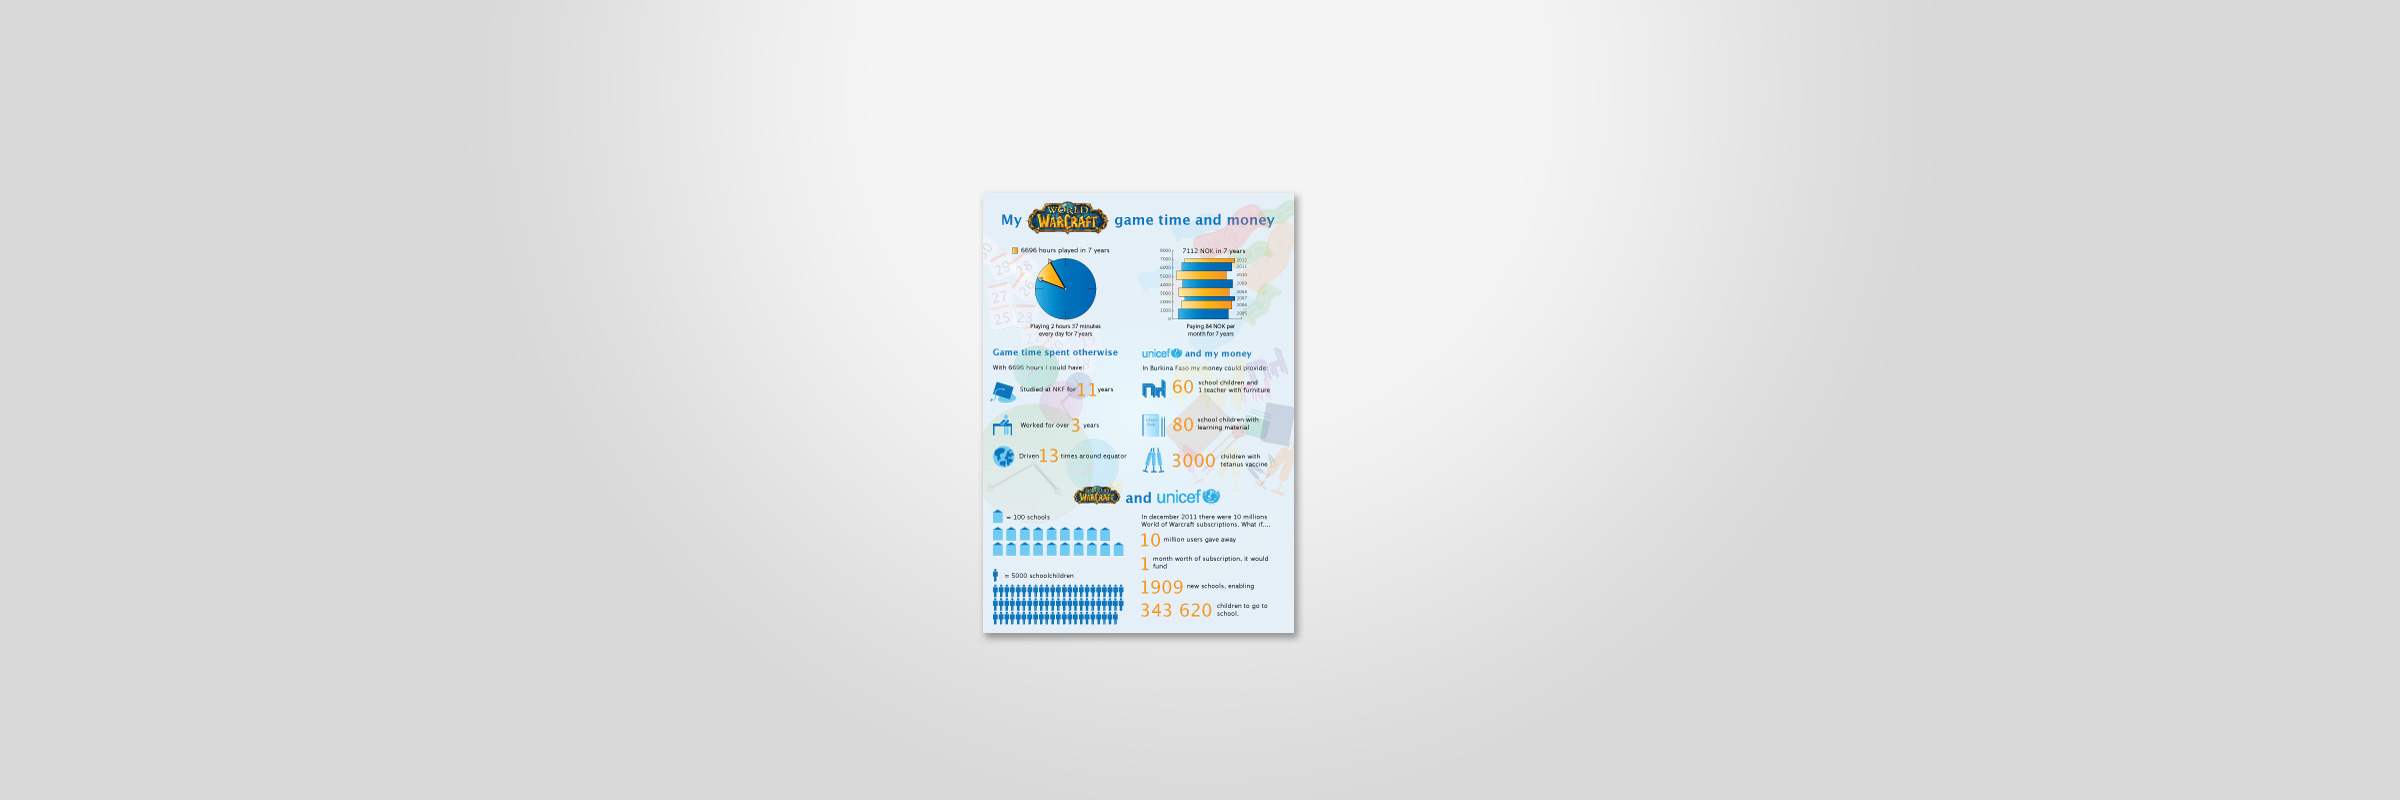 Showcase for My World of Warcraft gametime and money infographic